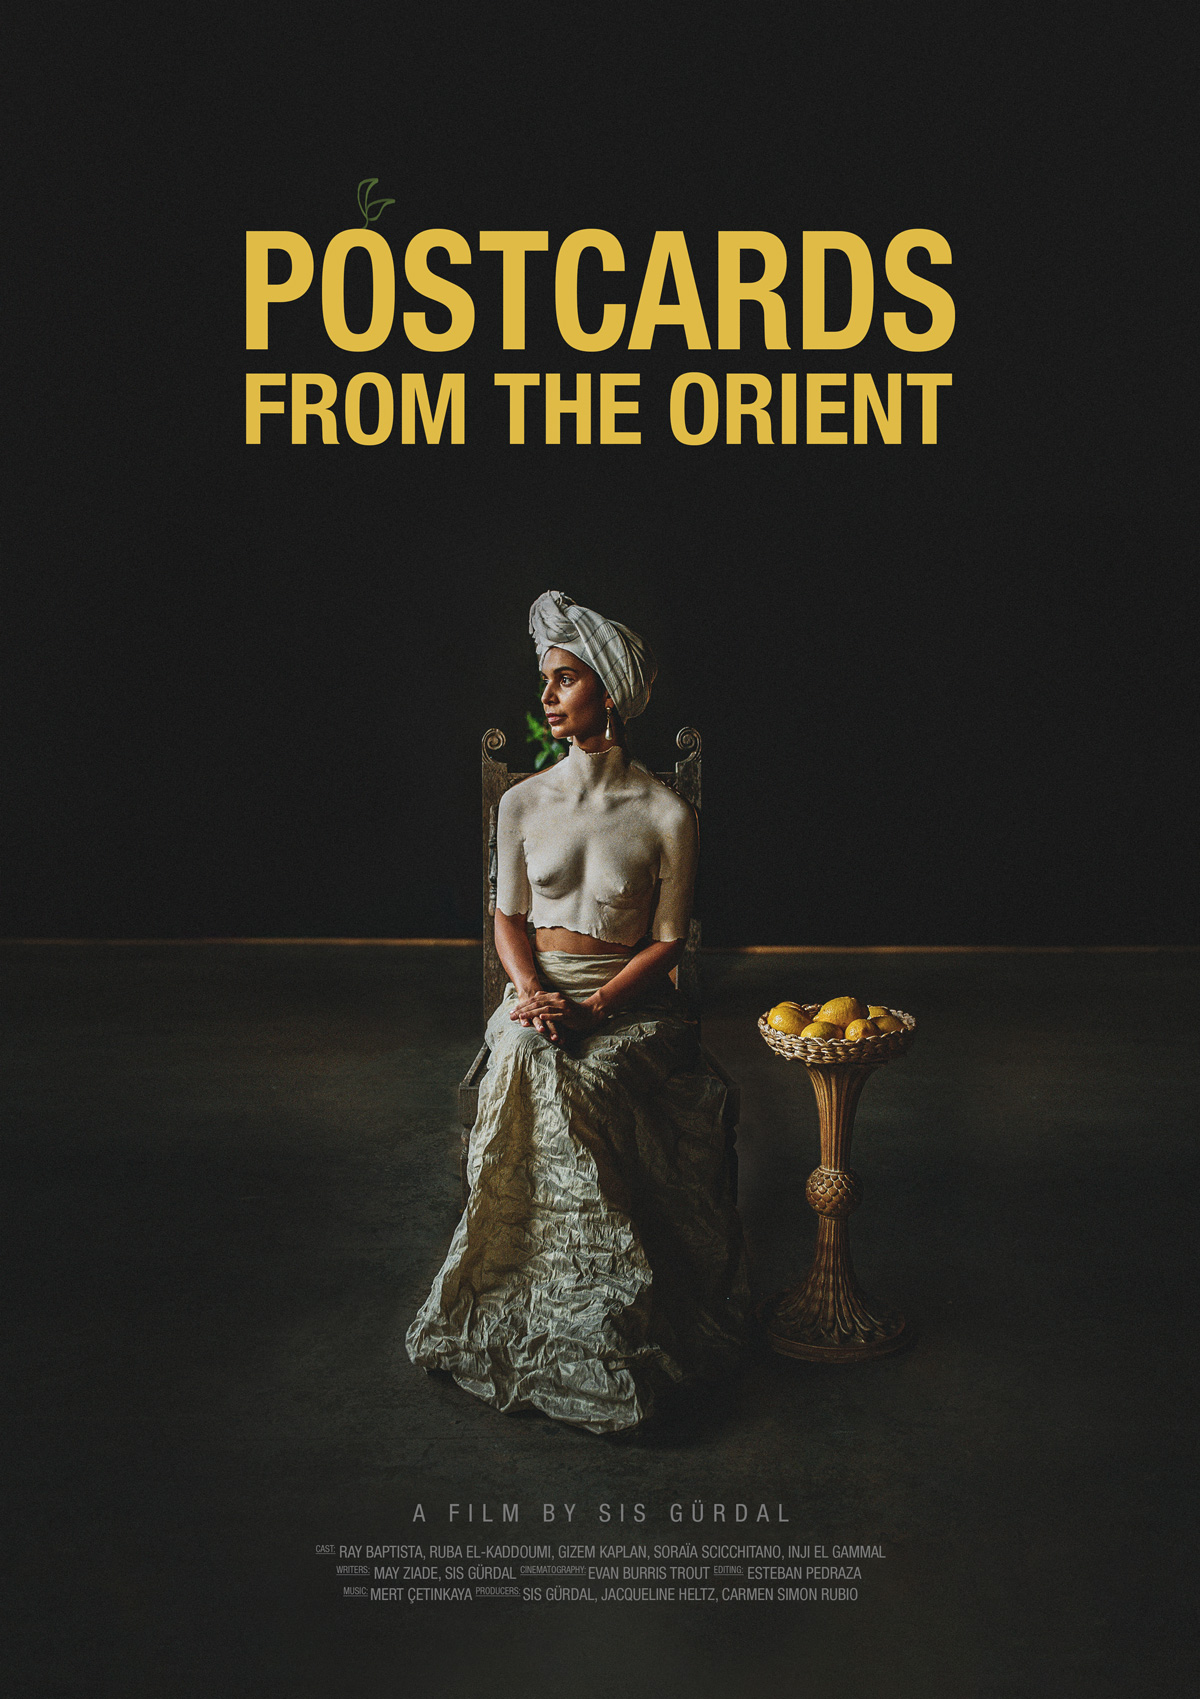 Postcards from the Orient